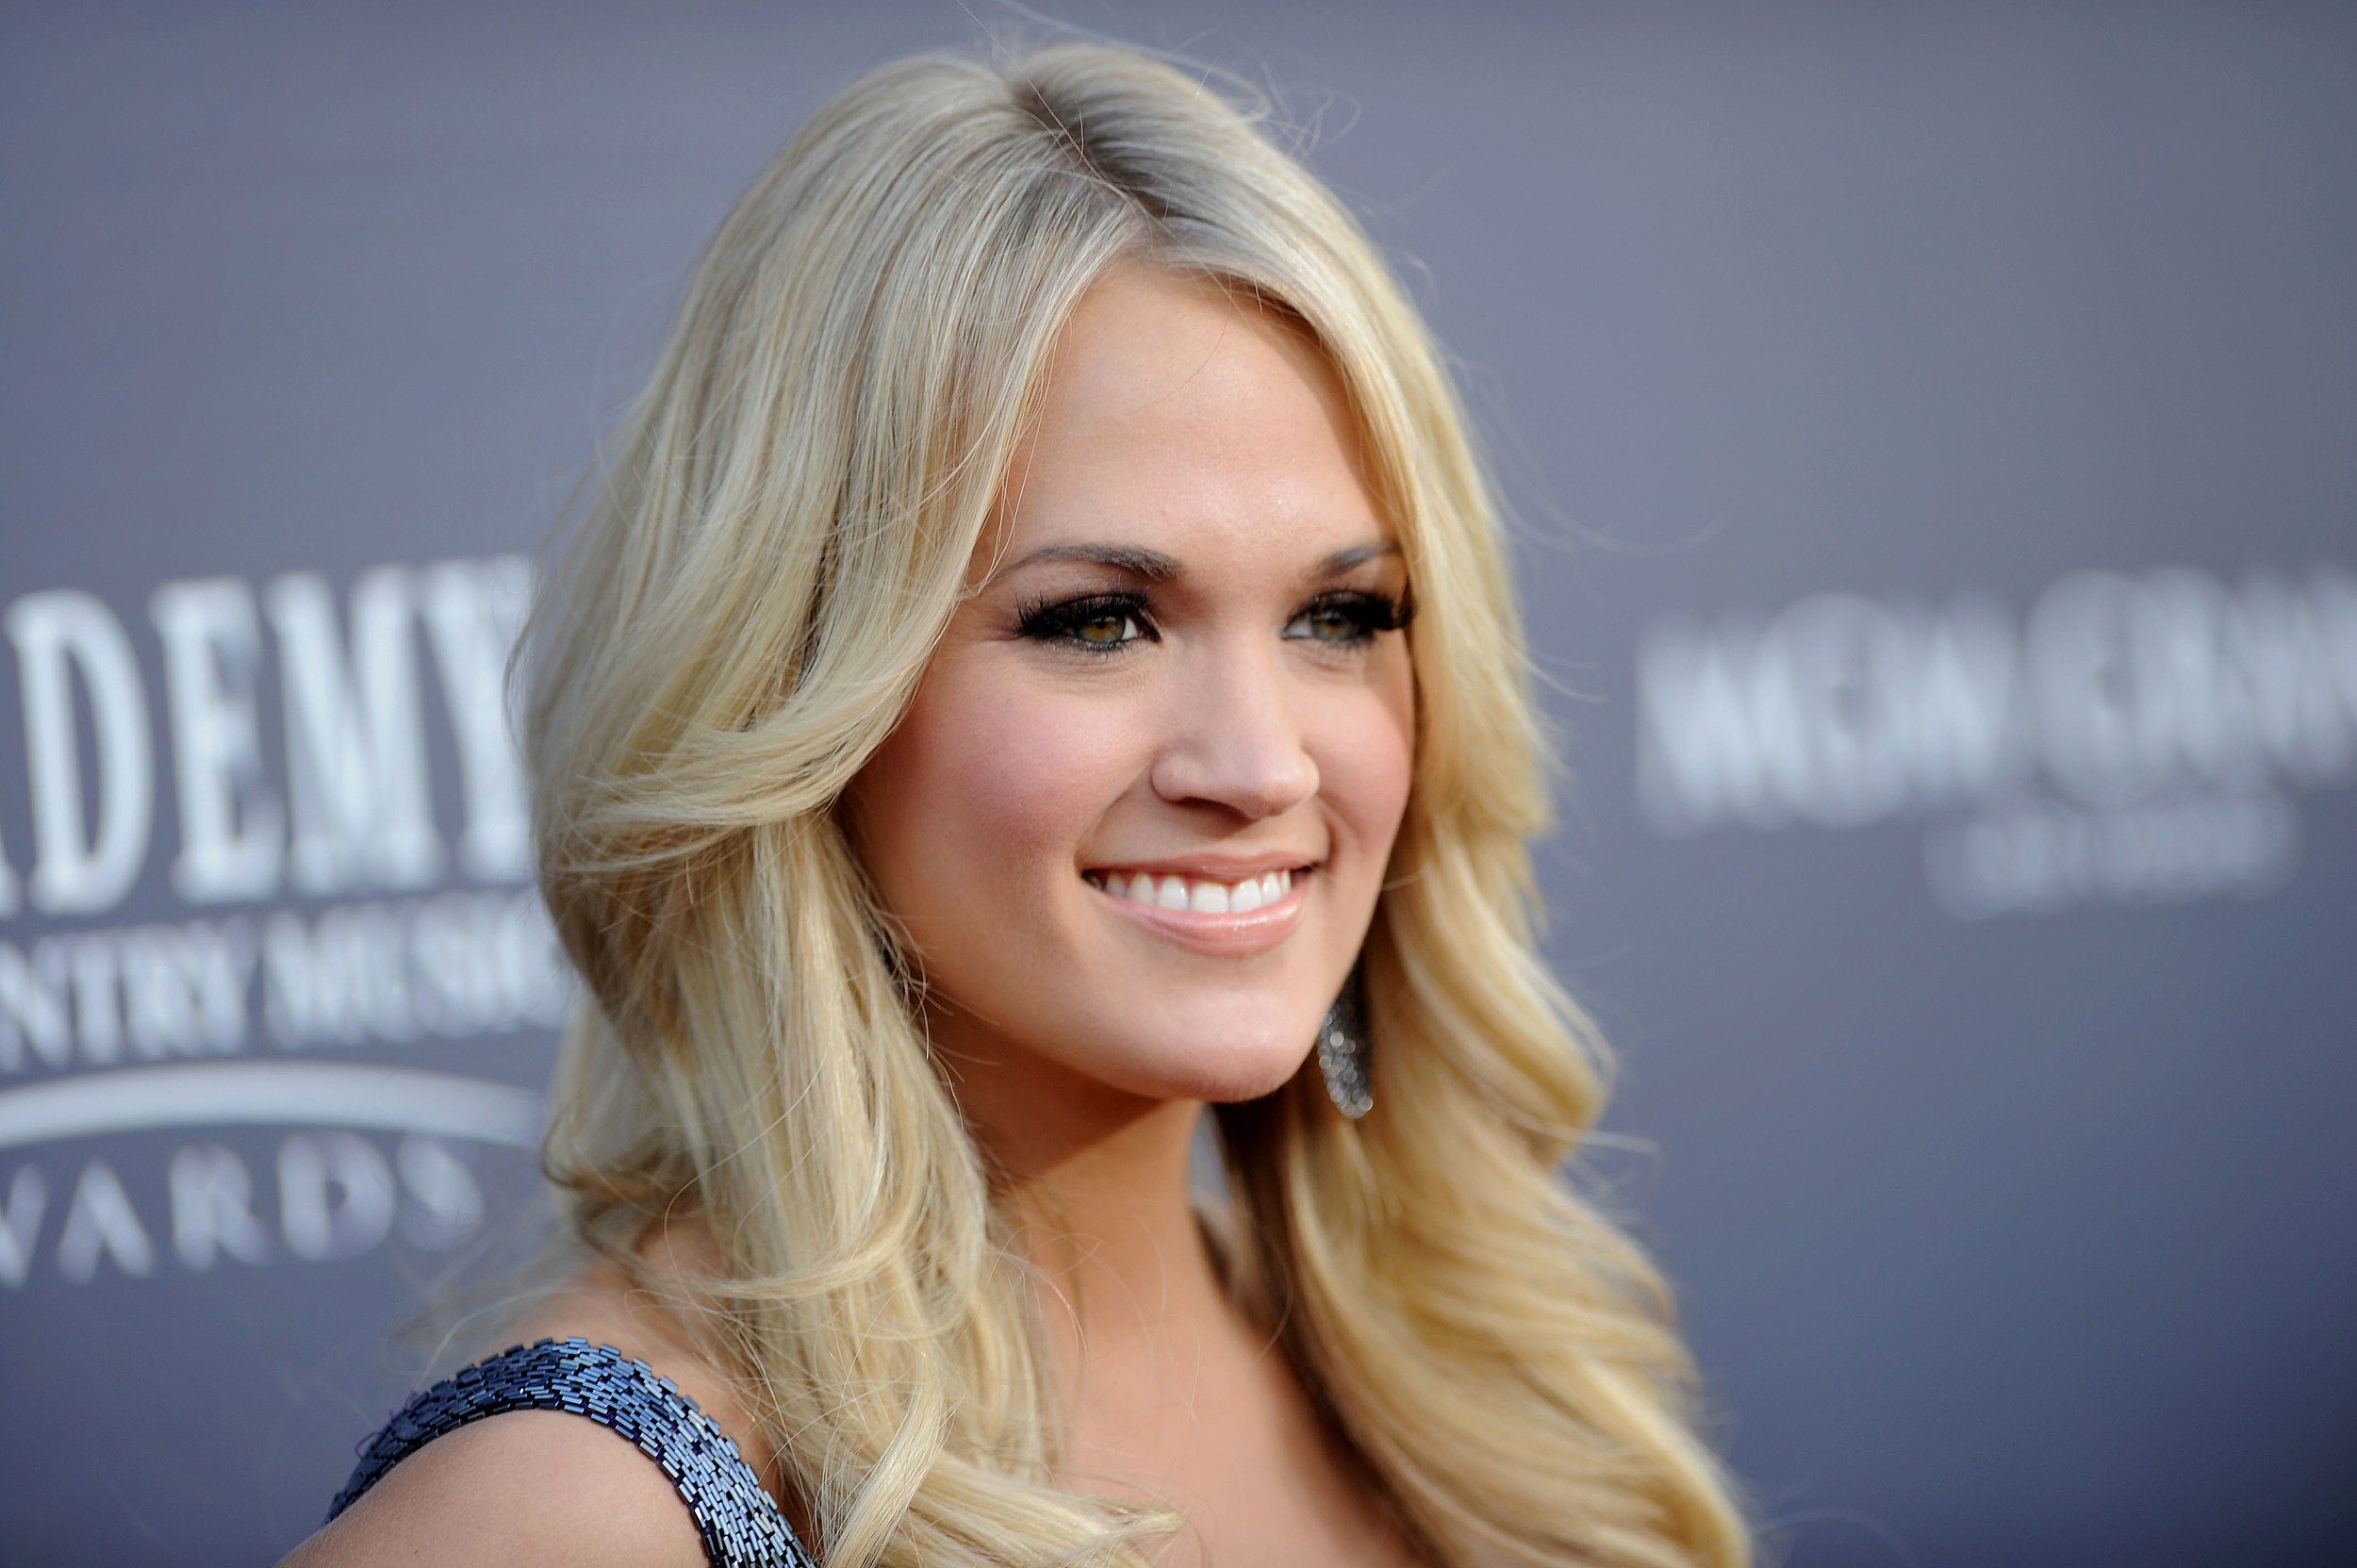 CARRIE UNDERWOOD Is One Of The Most ‘Dangerous’ Celebrities